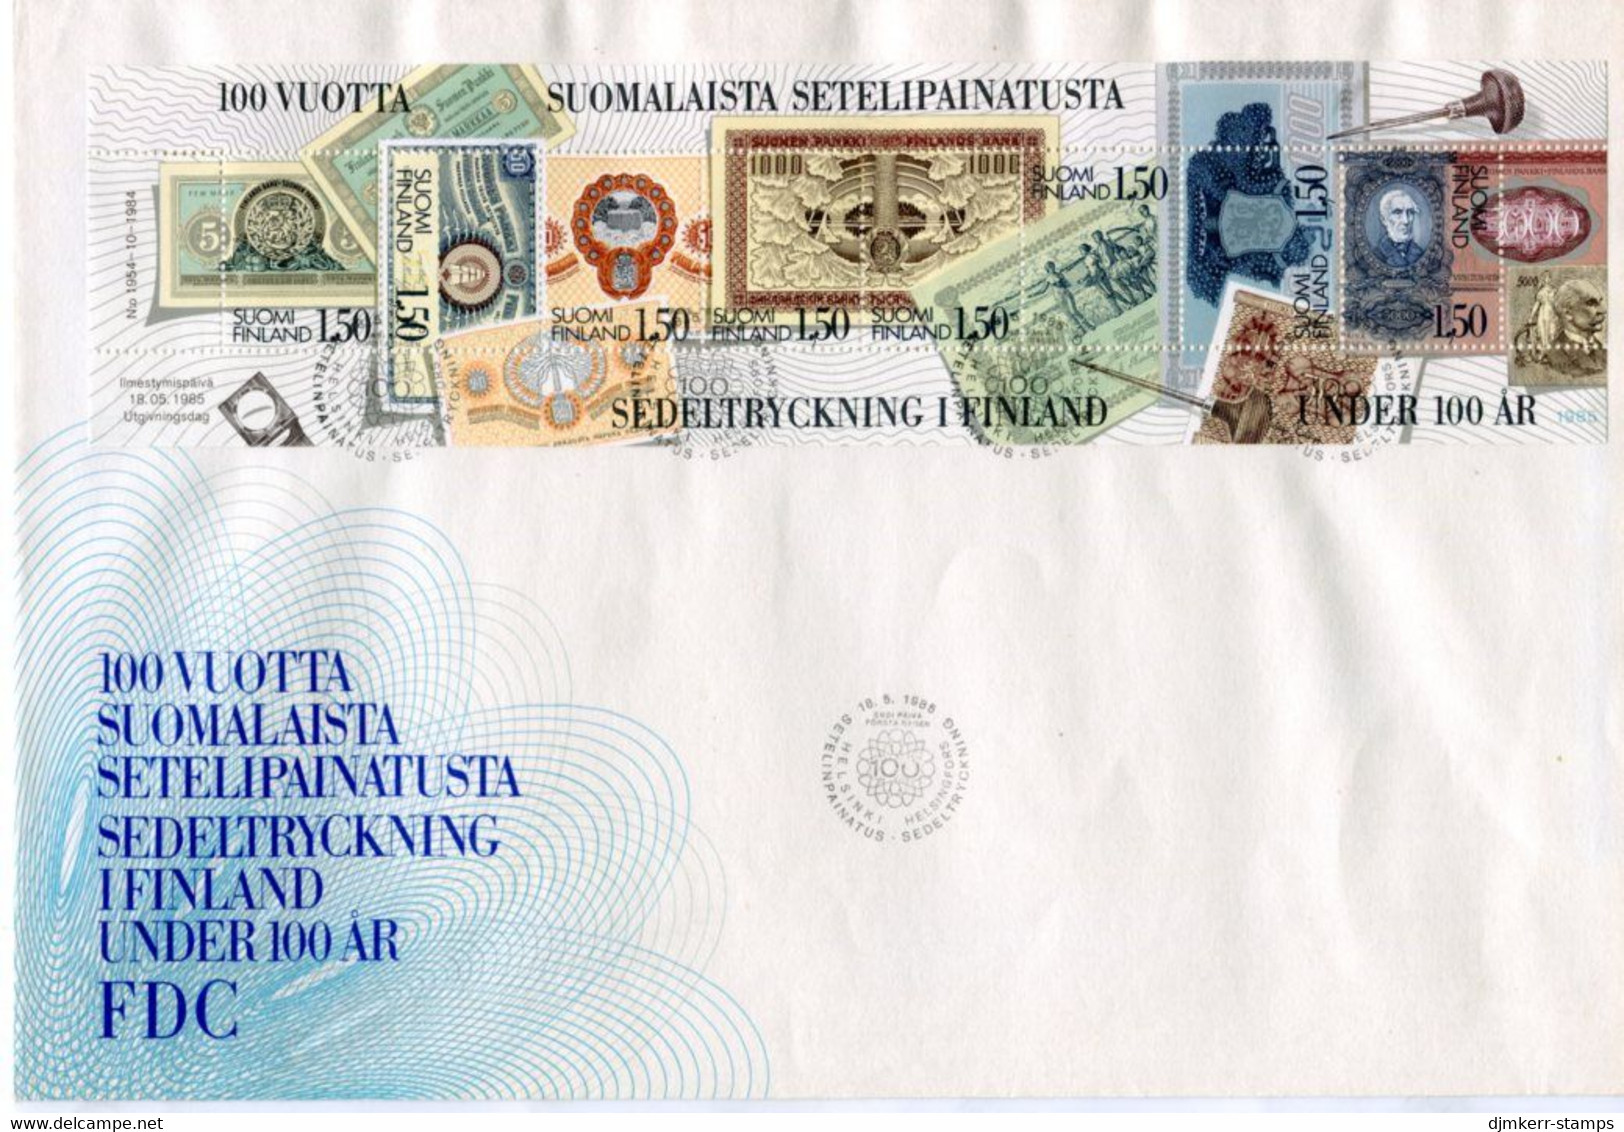 FINLAND 1985 Banknote Printing Works FDC.  Michel 960-67 - FDC